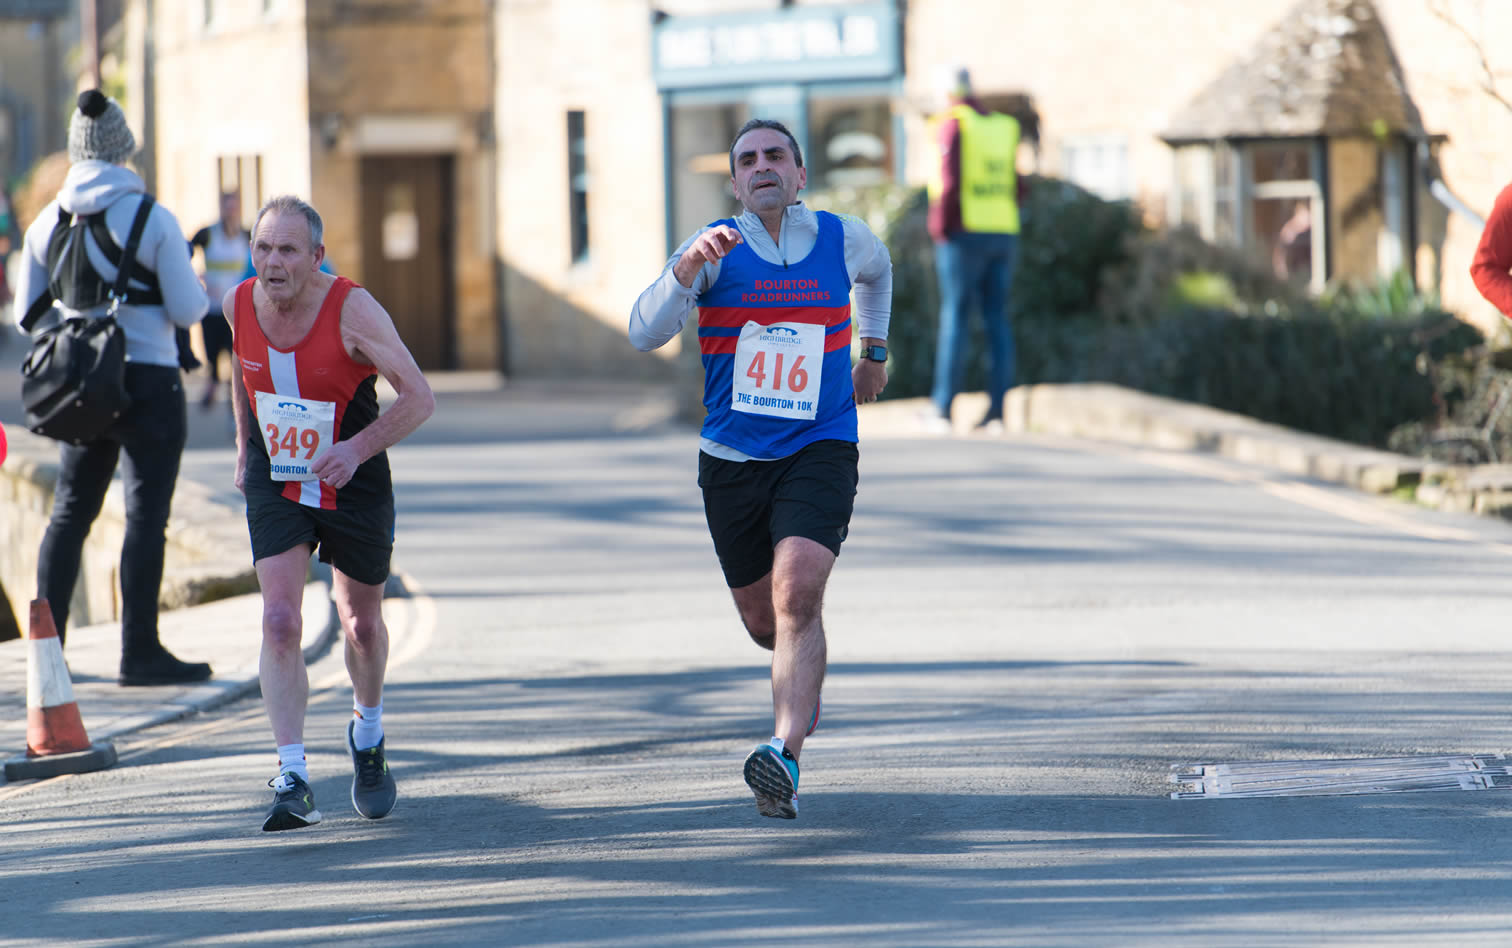 Andre Martins at Bourton 10k - 27th February 2022